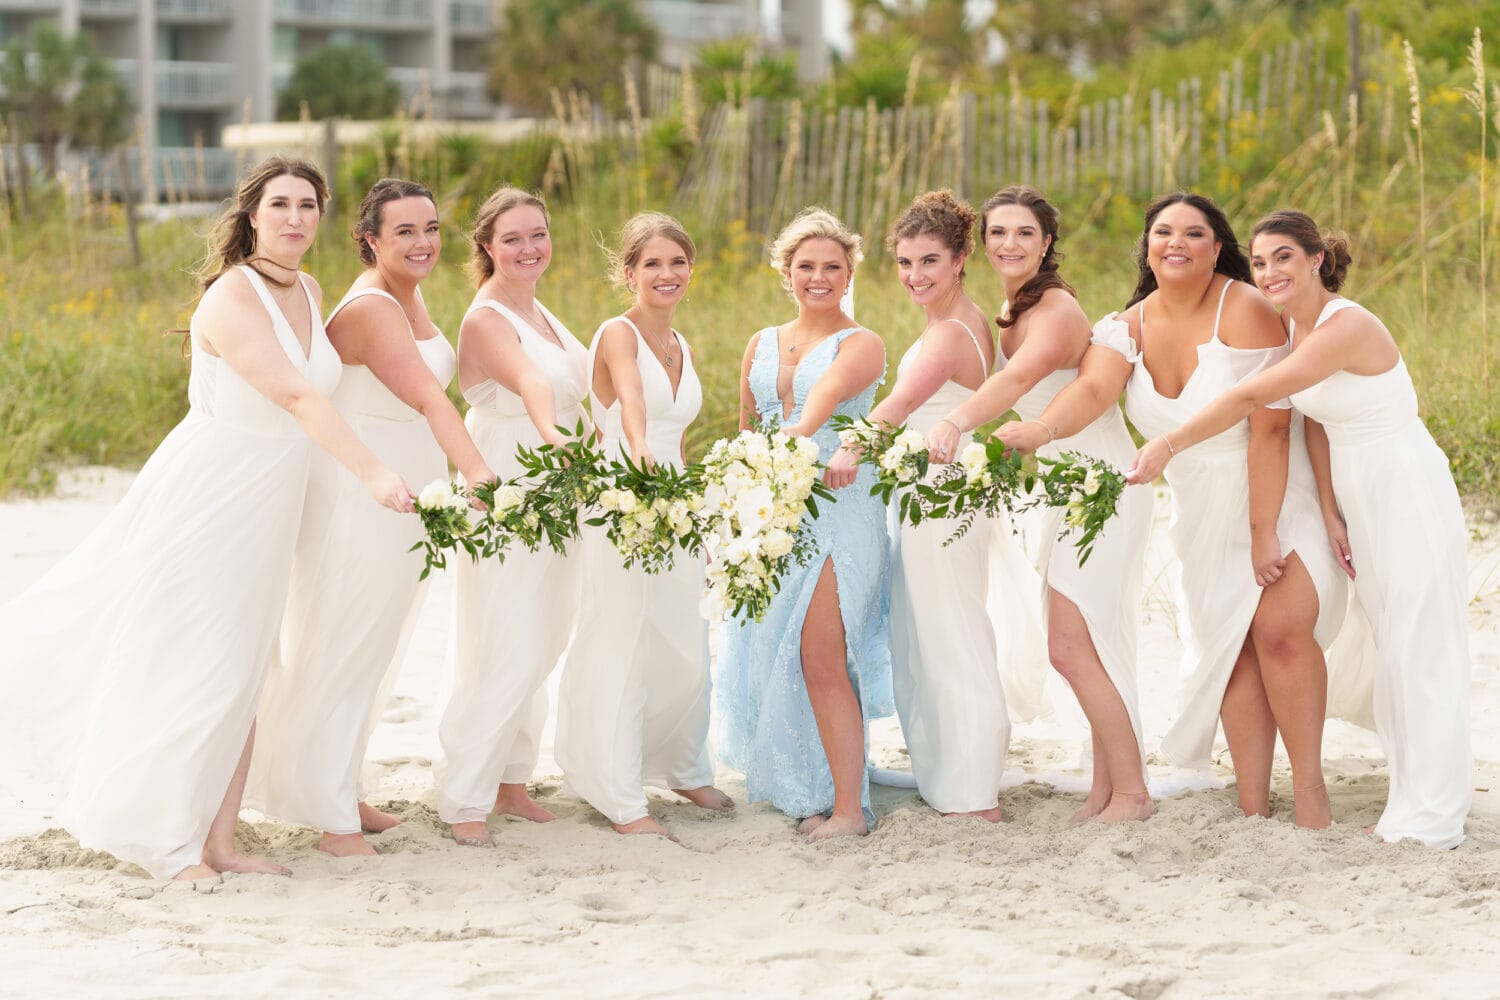 Pictures with the bridesmaids on a windy day - Hilton Myrtle Beach Resort